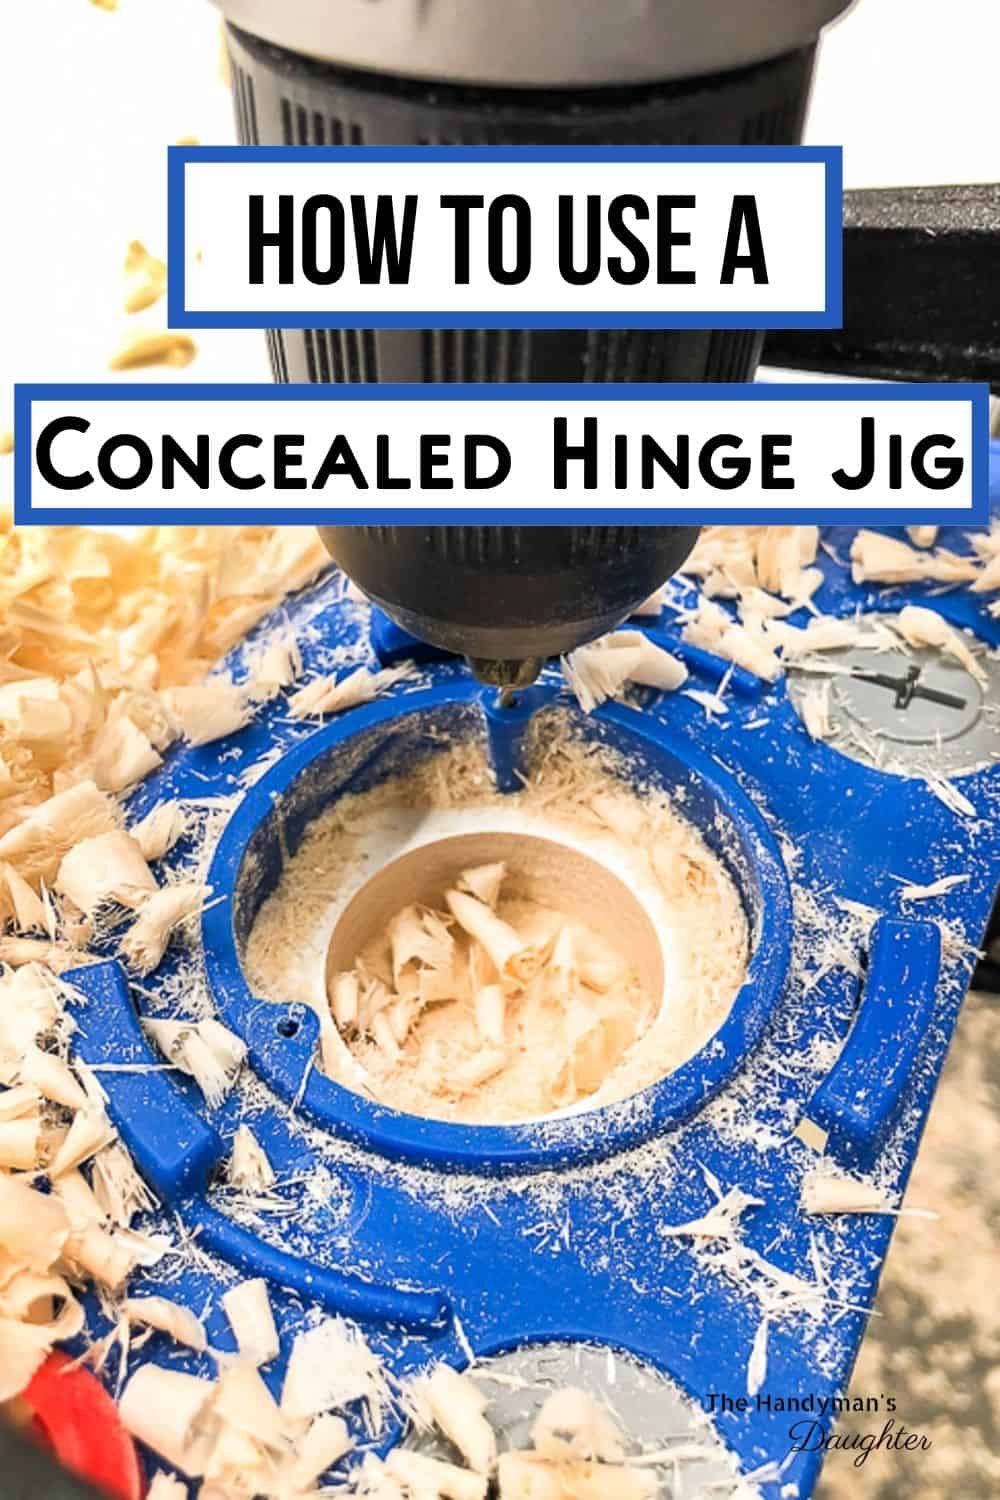 how to use a concealed hinge jig